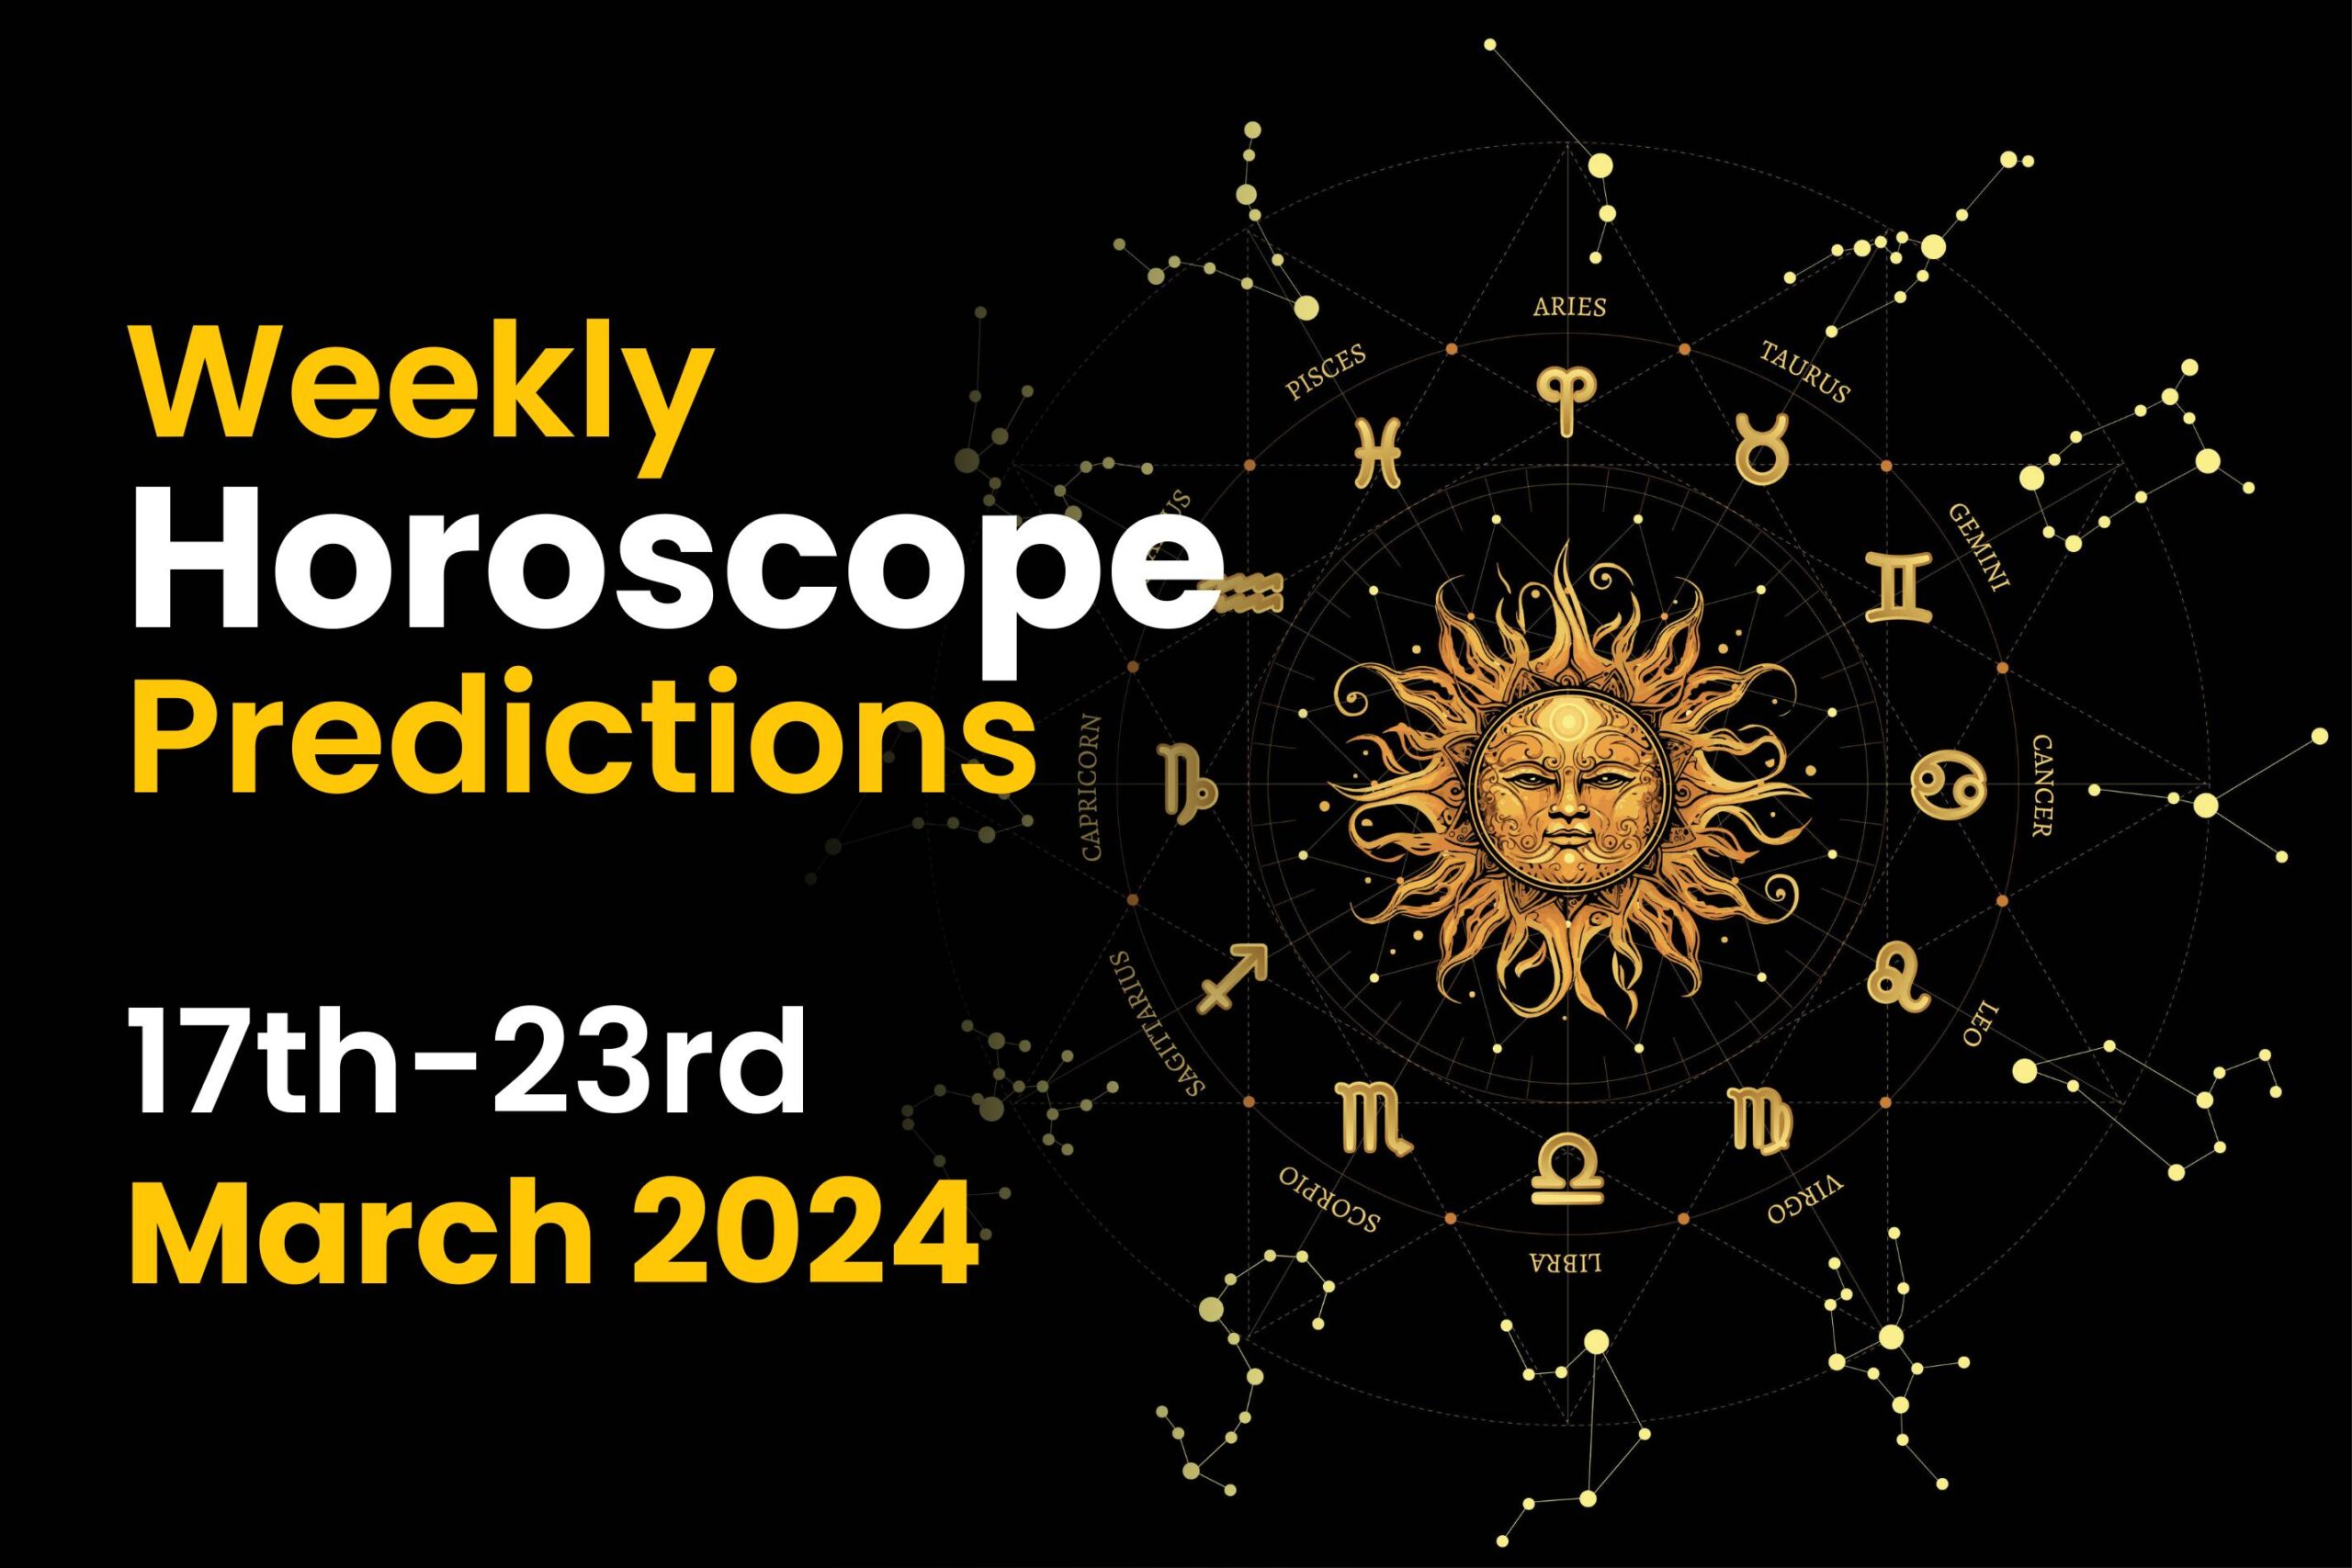 Weekly Horoscope Predictions: 17th March to 23rd March 2024 